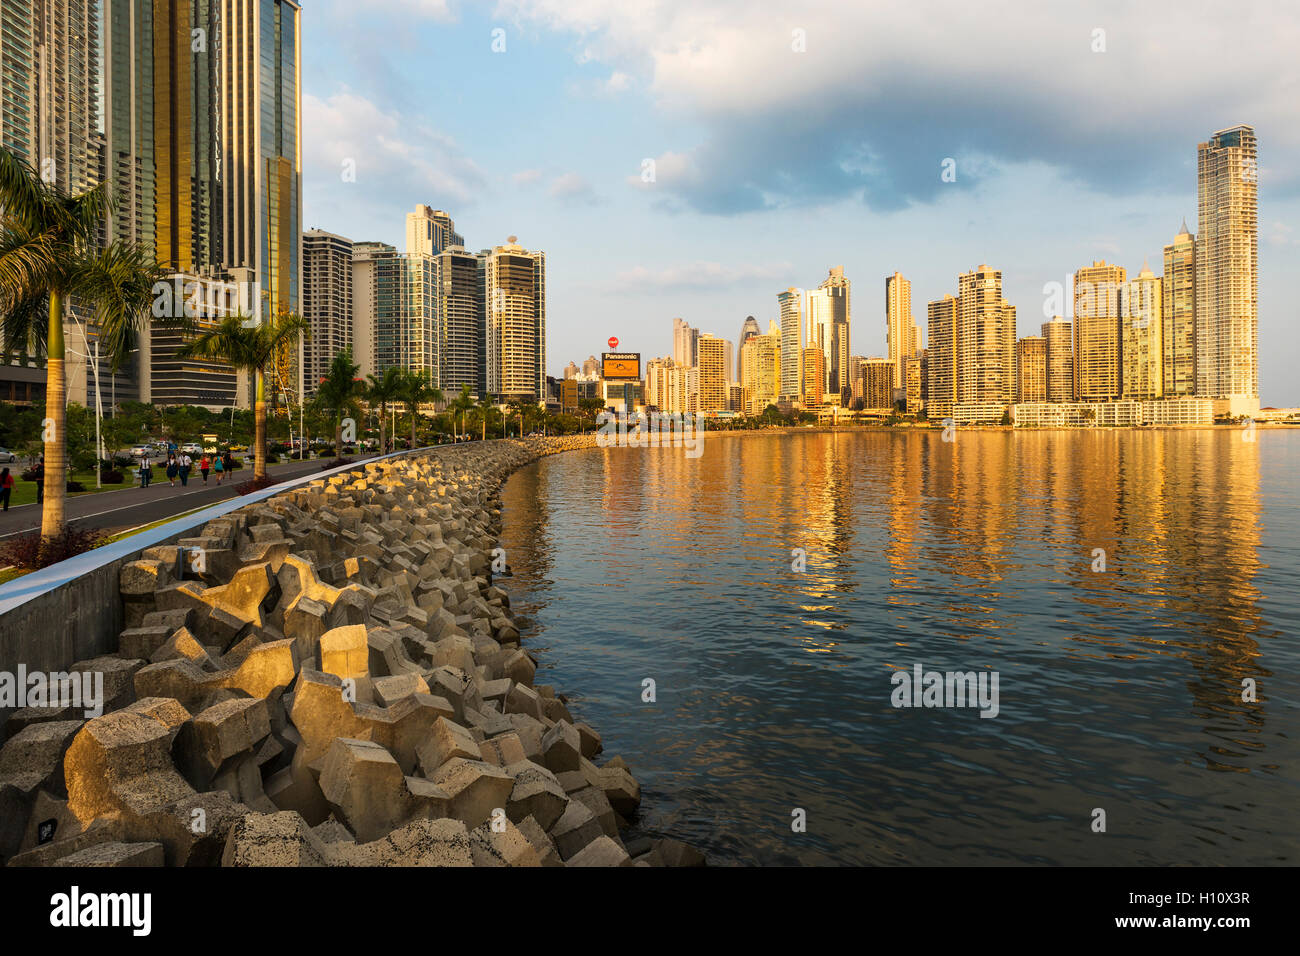 Panama City, Panama - March 18, 2014: View of the financial district and sea in Panama City, Panama, at sunset. Stock Photo